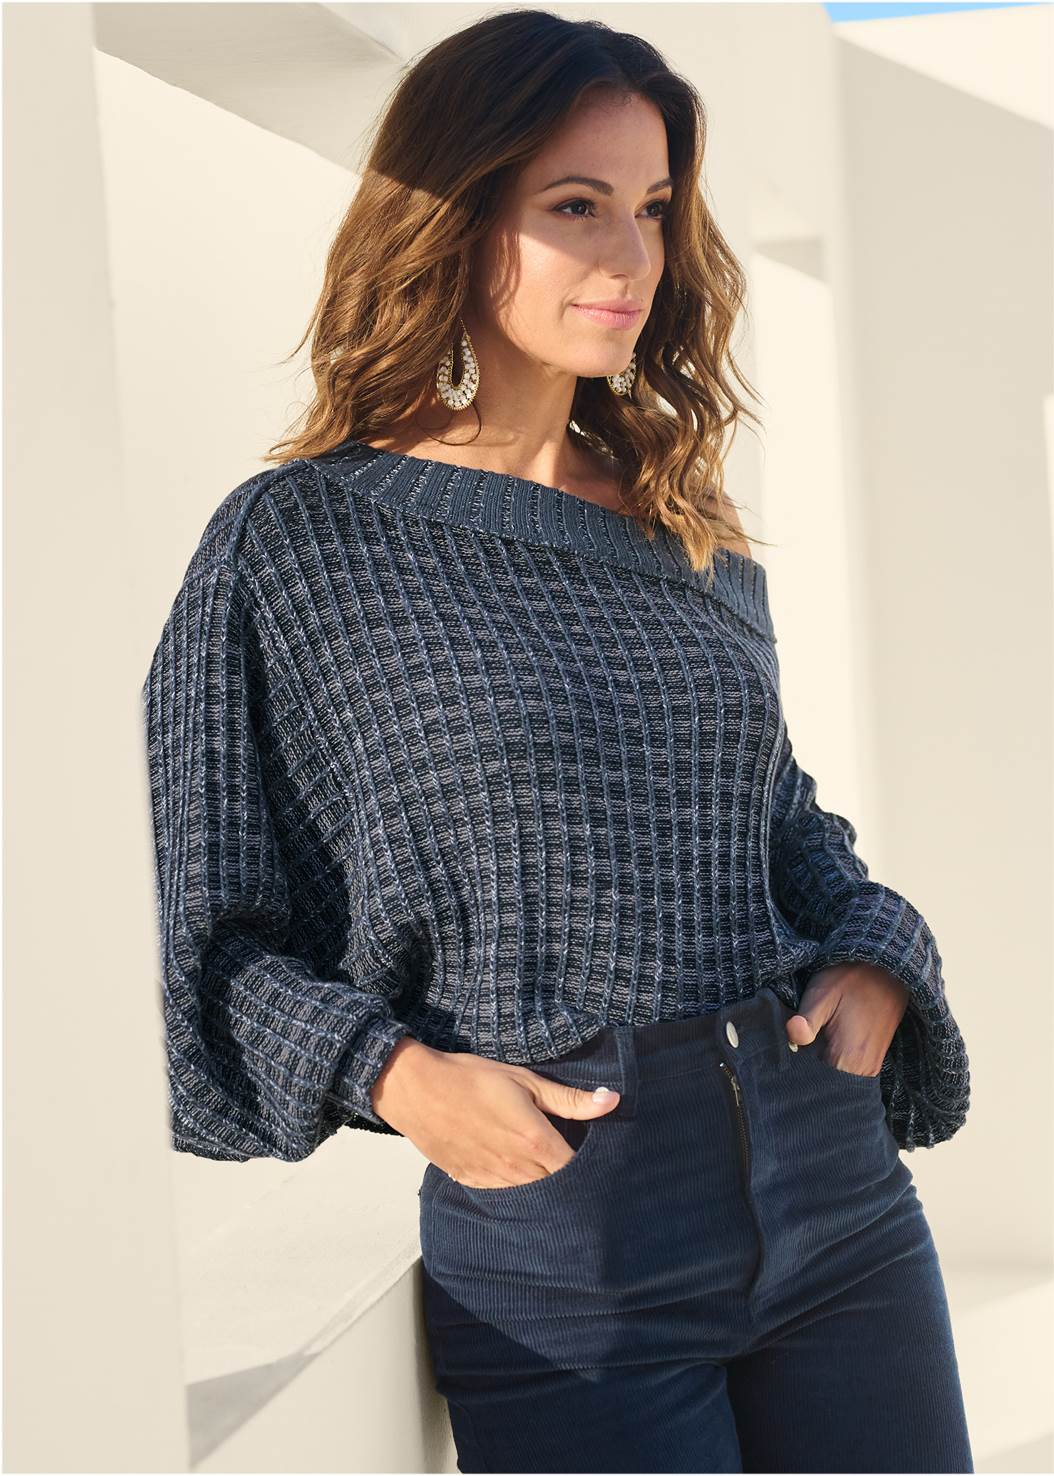 OFF-THE-SHOULDER SWEATER in Navy & White | VENUS